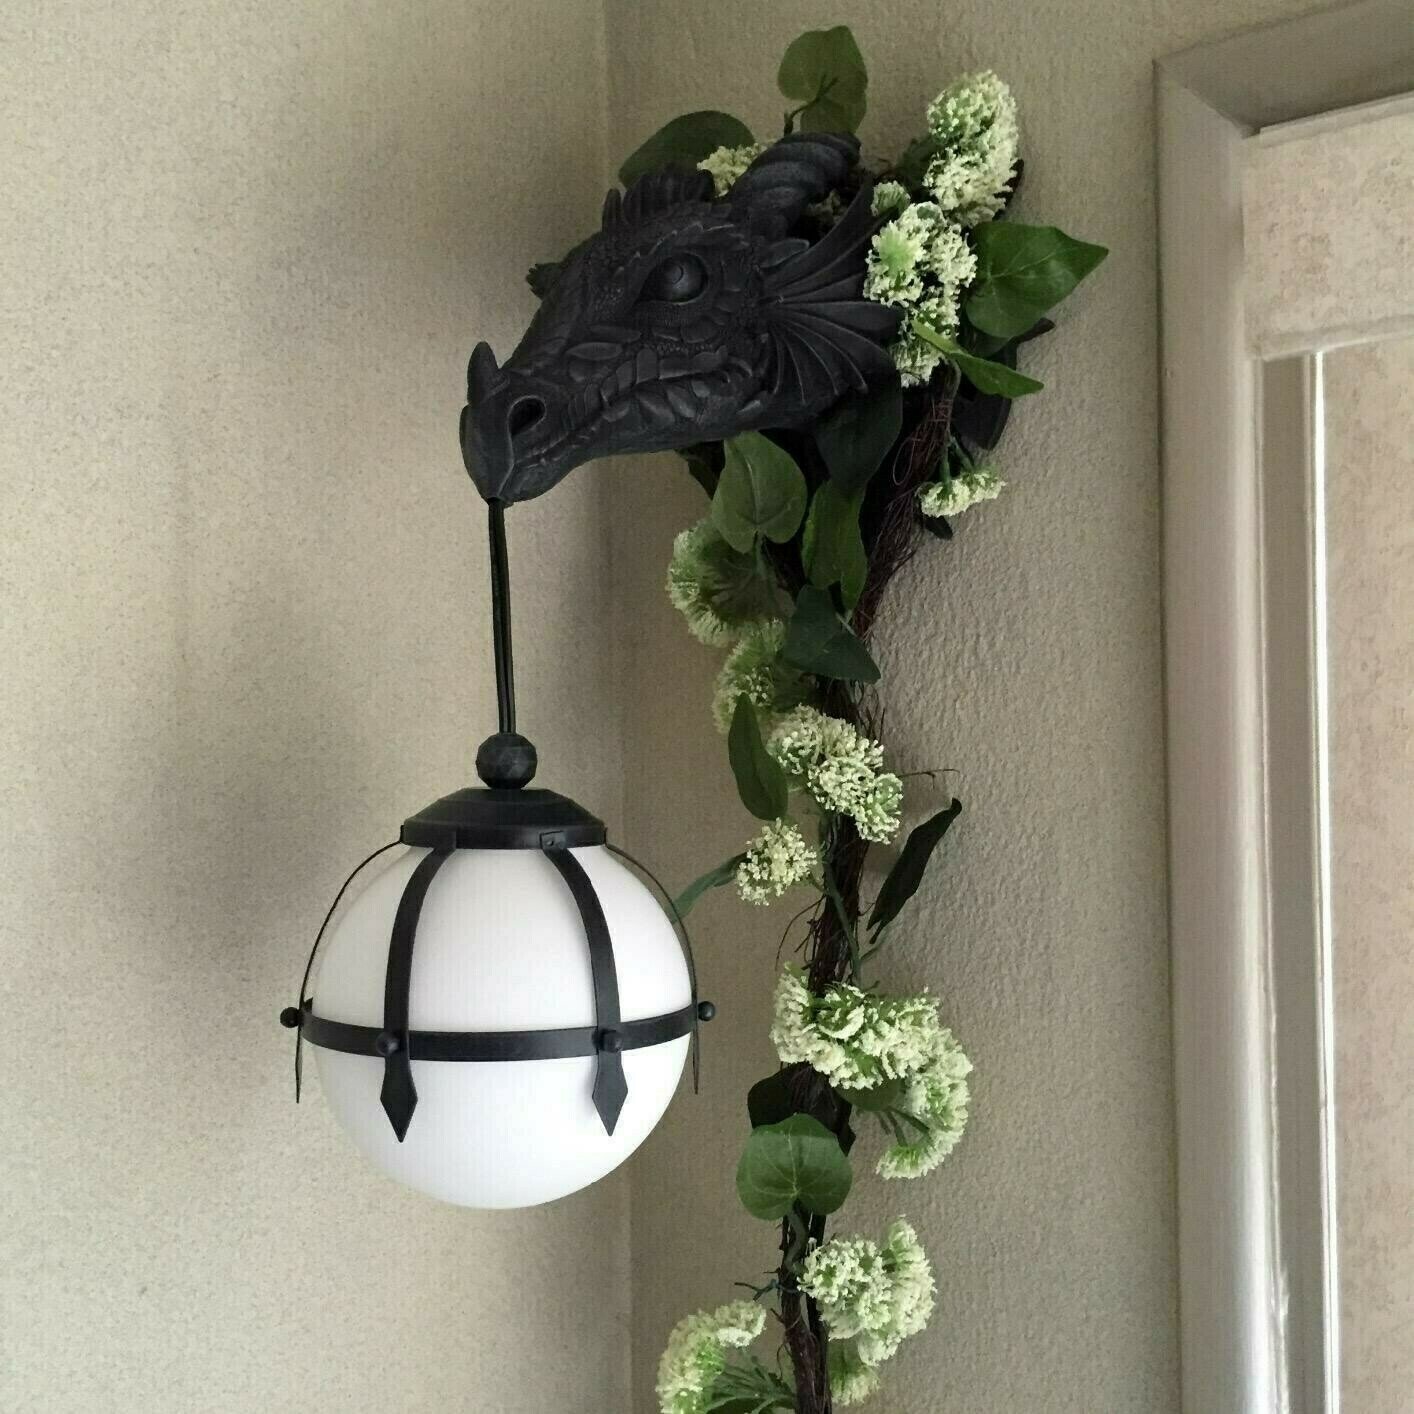 Gothic Marshgate Castle Dragon Sculptural Electric Wall Sconce(BUY 2 GET FREE SHIPPING)